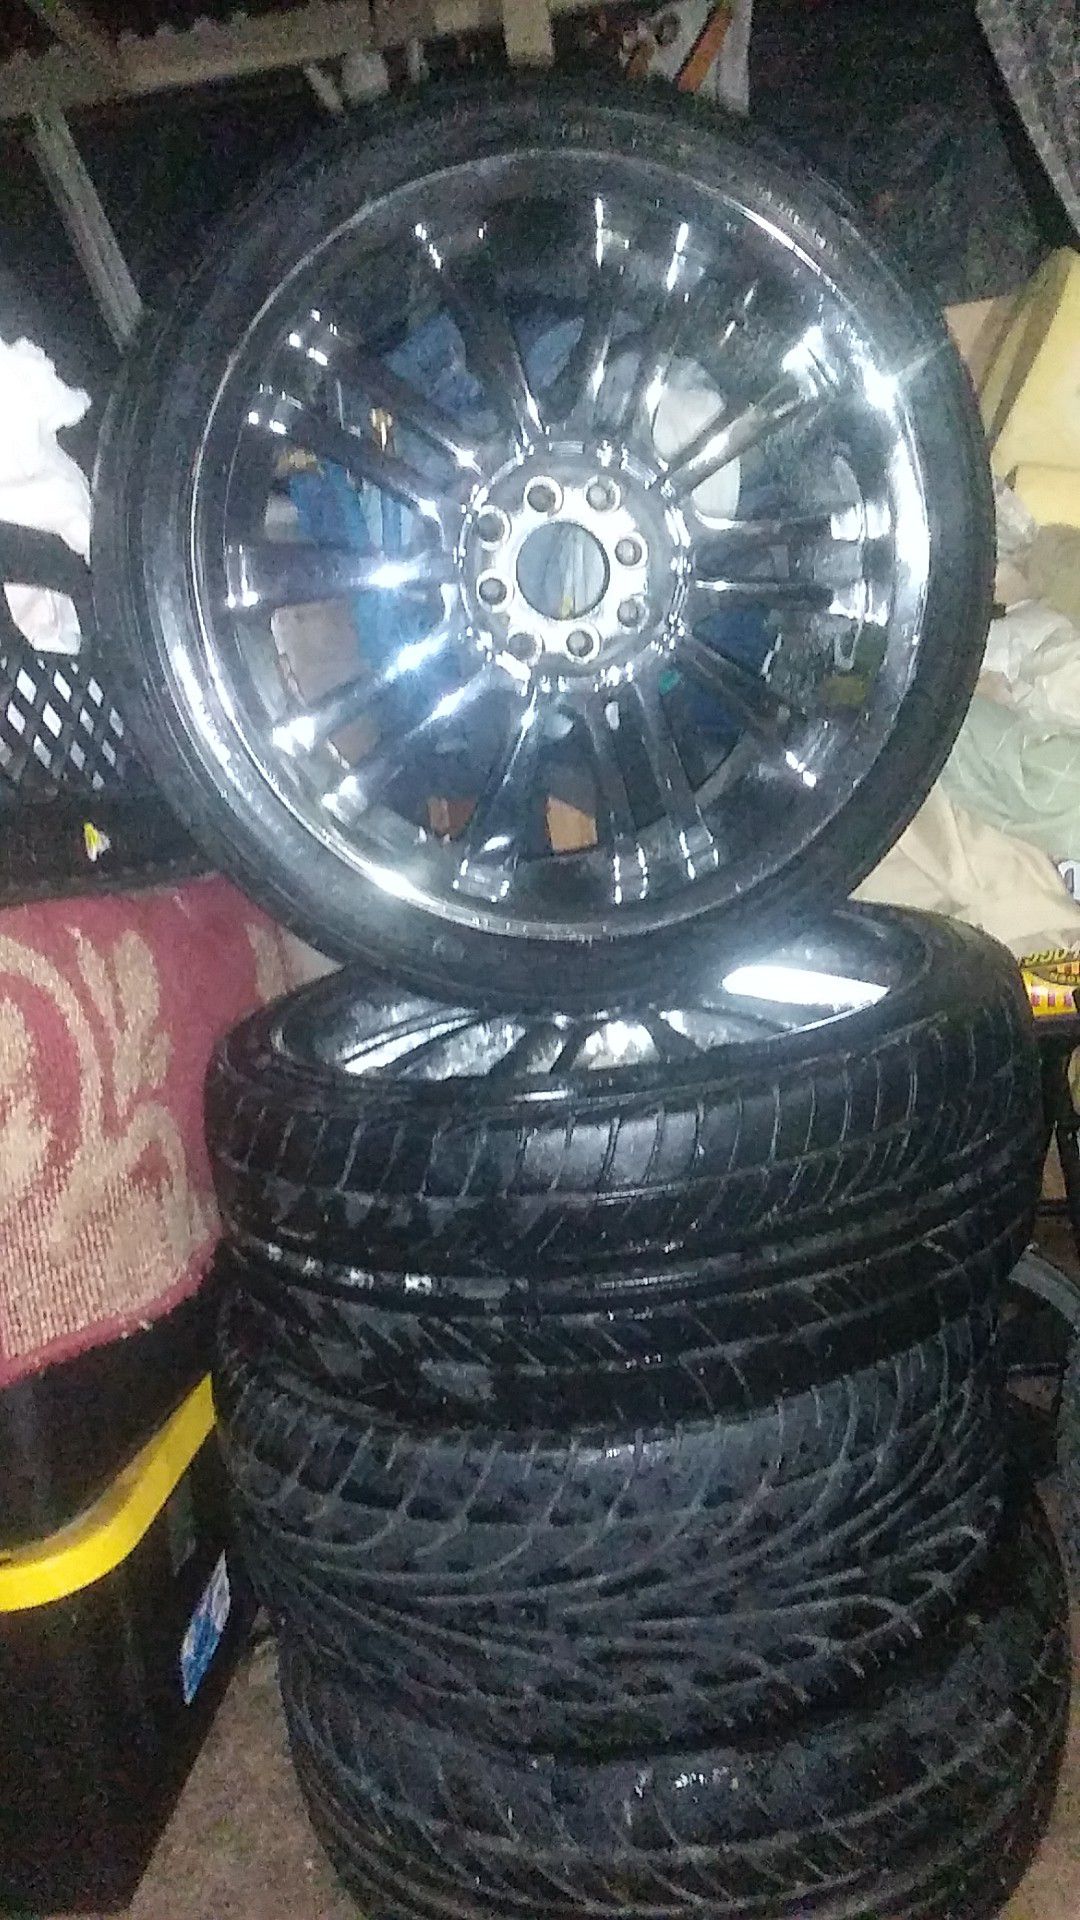 Set of 4 Tires and Wheels